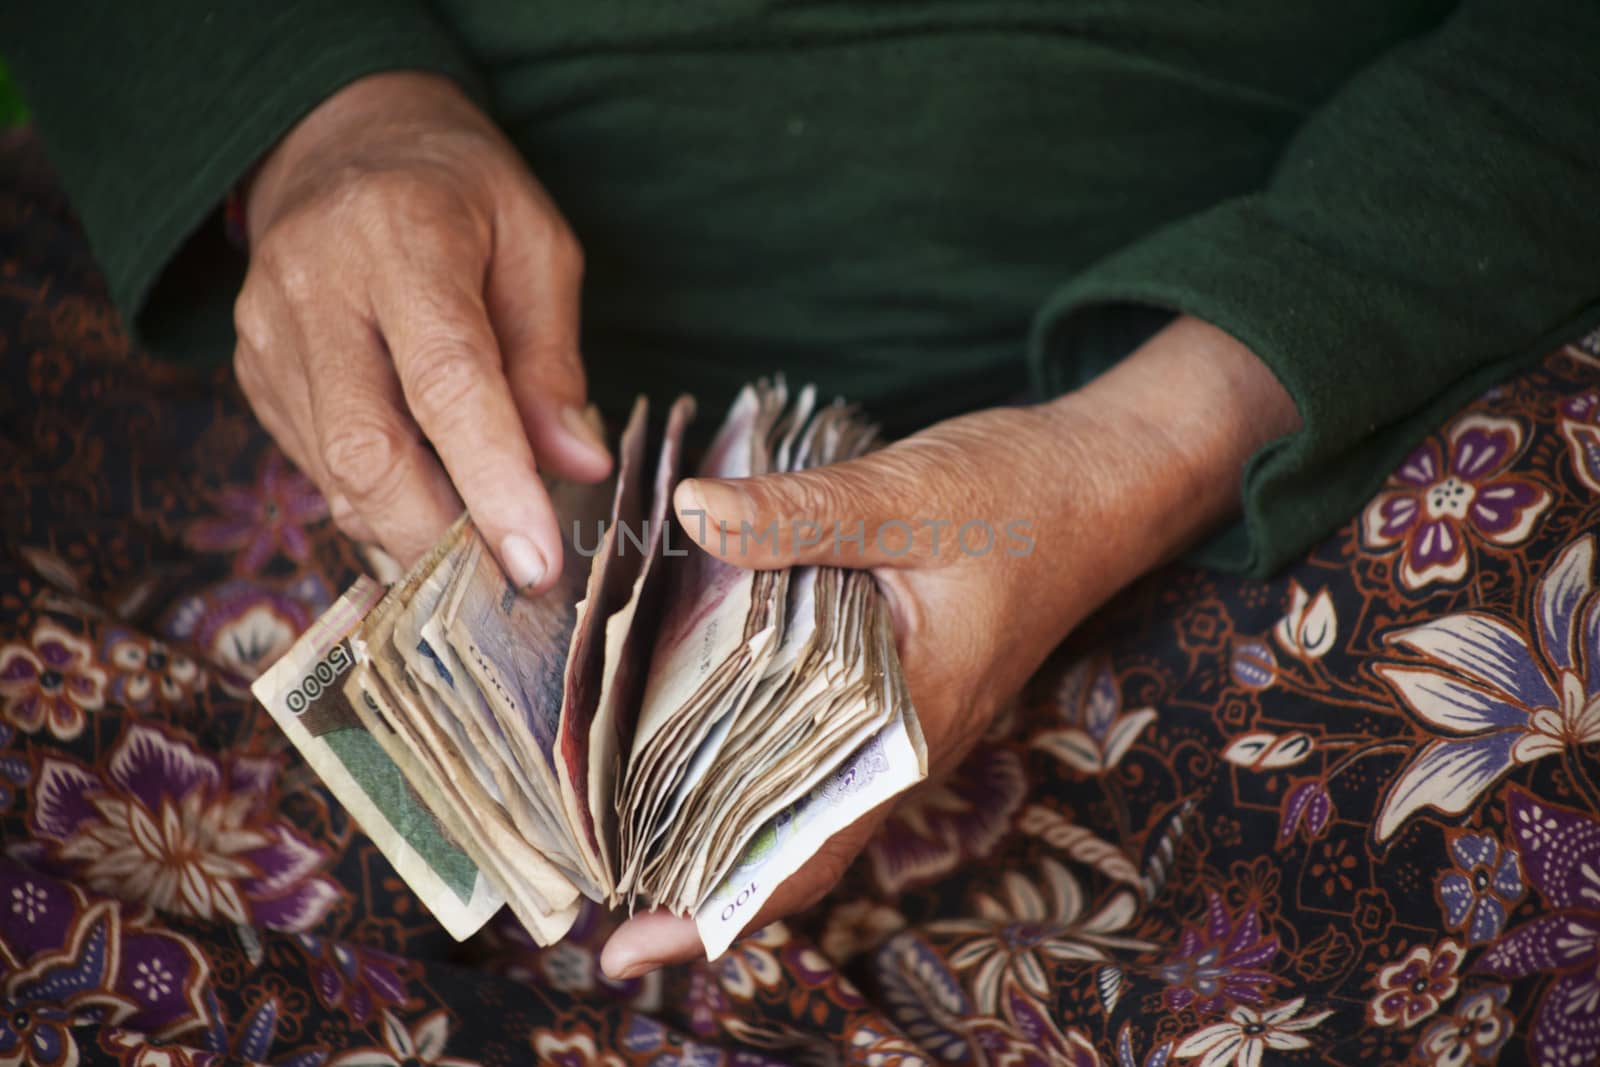 Ederly woman  counting riel notes in a market in Cambodia